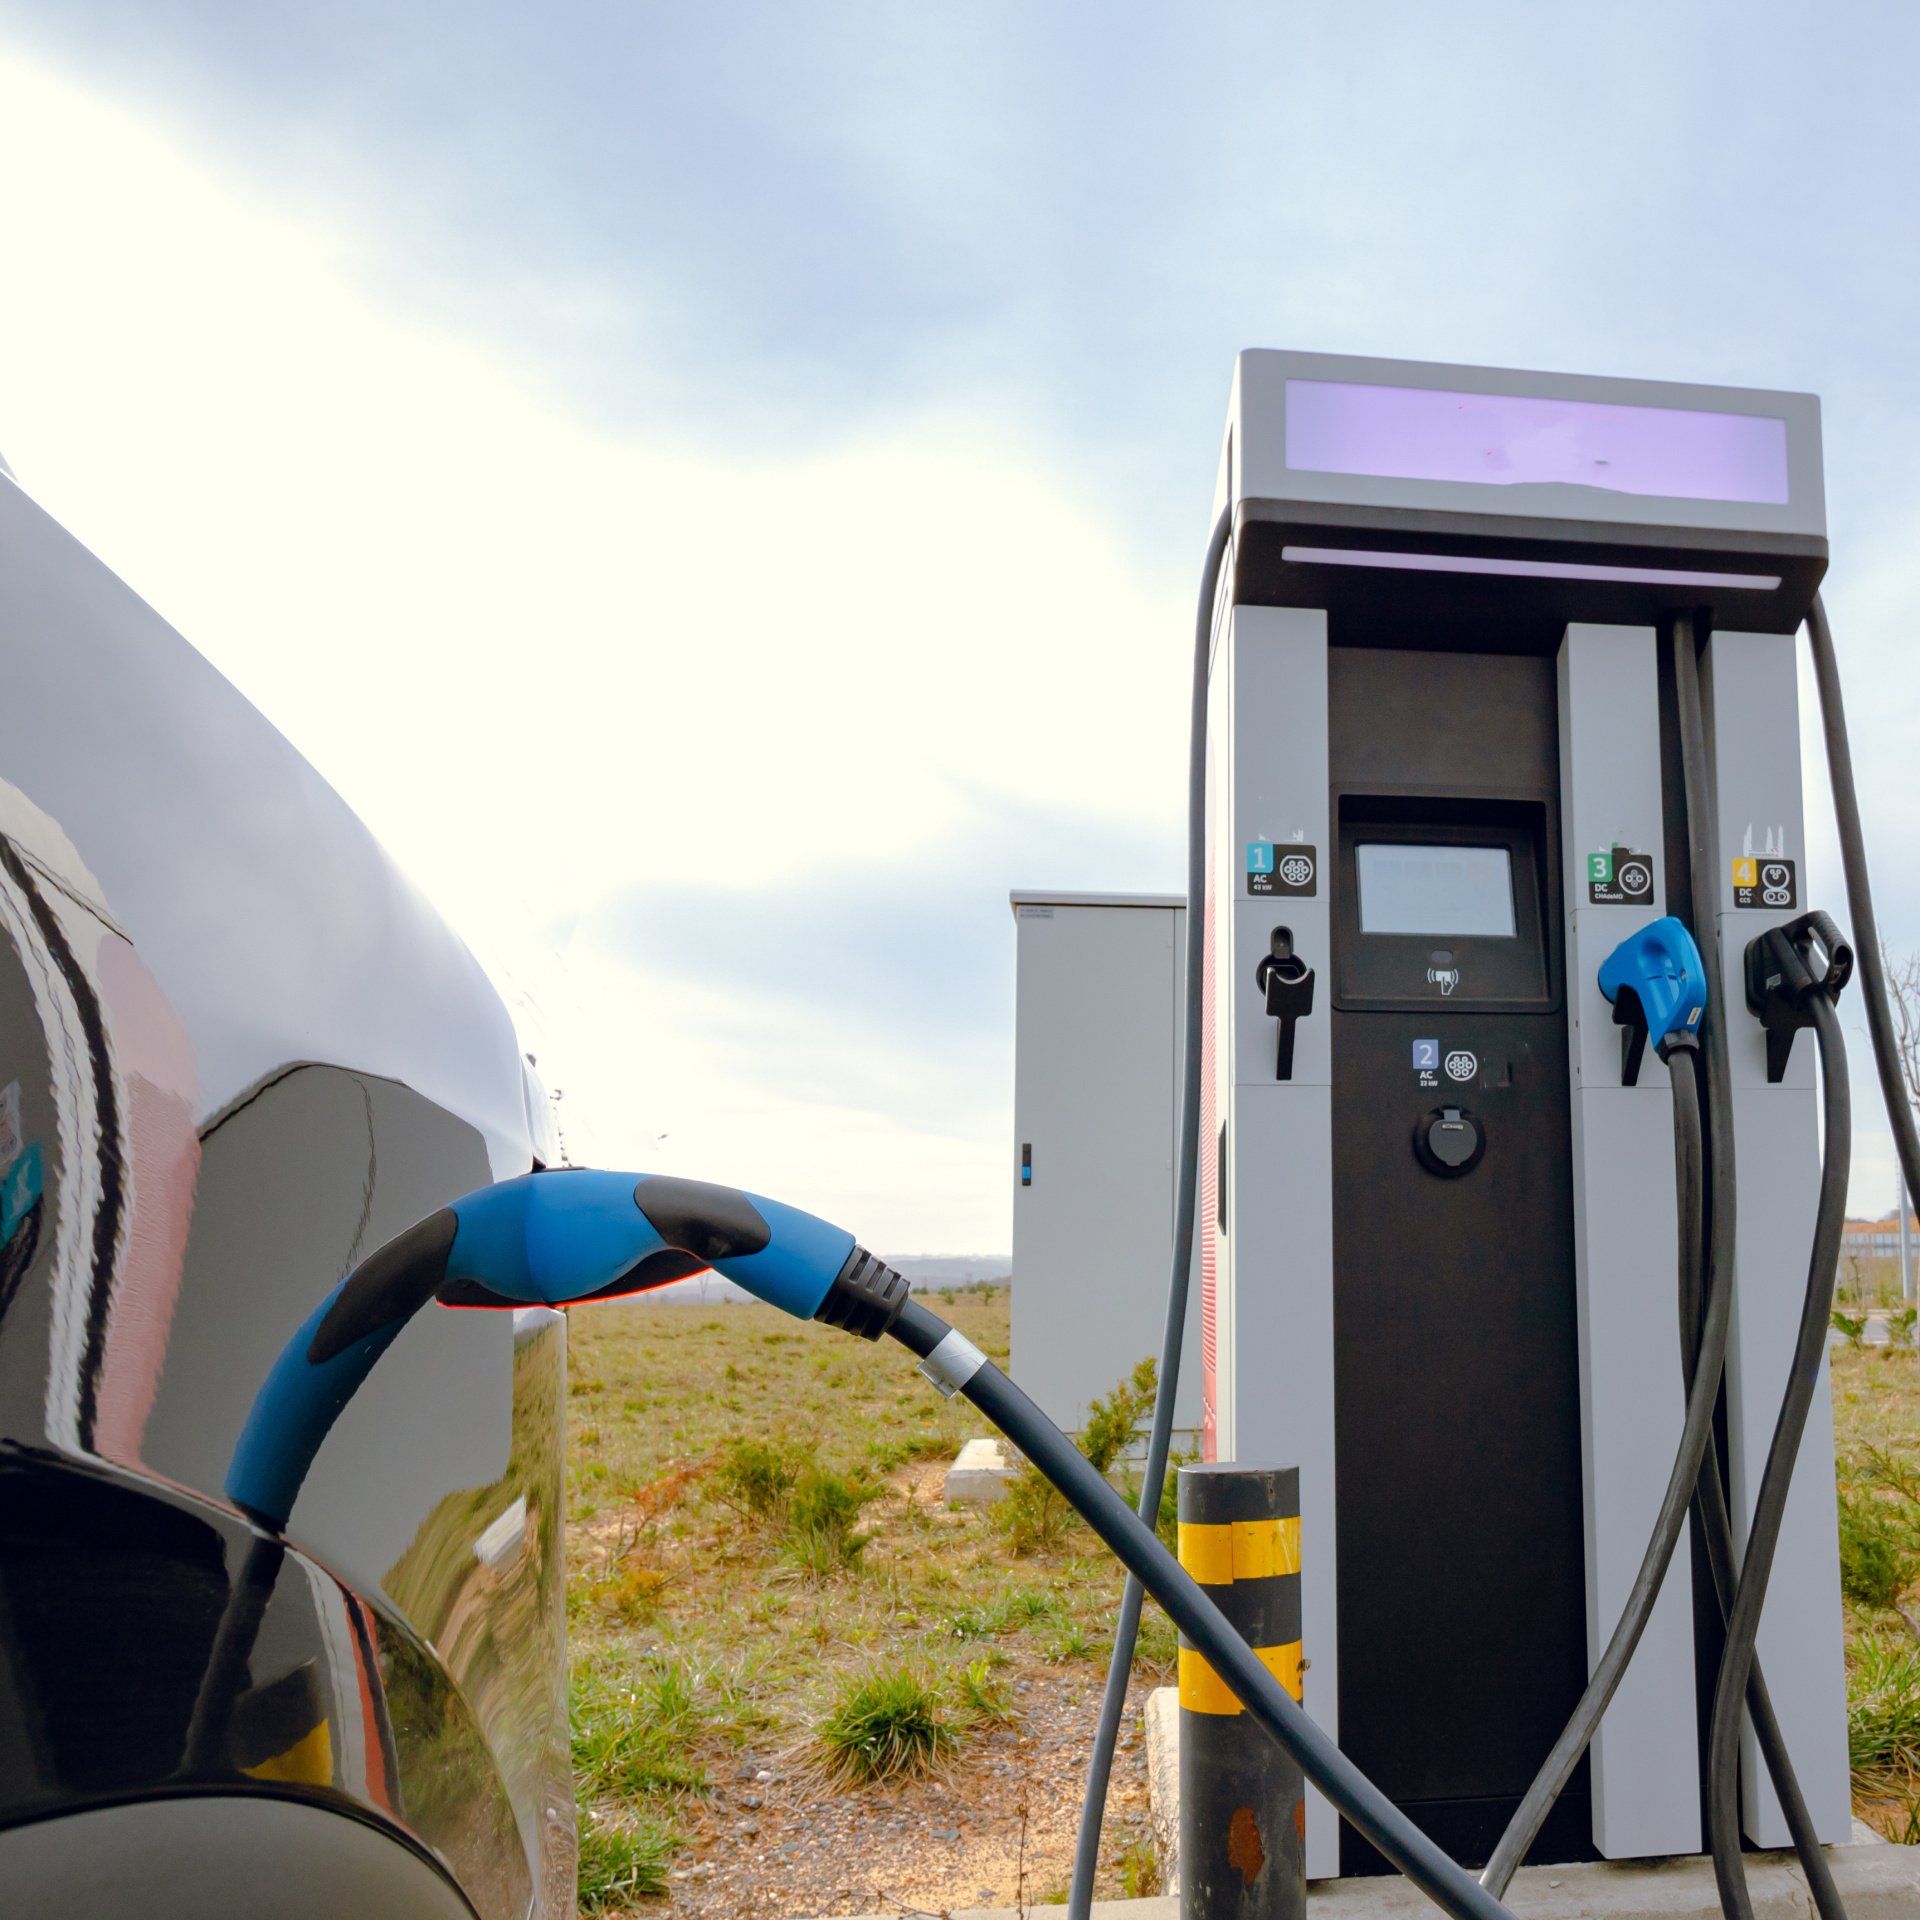 An electric car plugged into a charging station, with the charging cable connected to the vehicle.